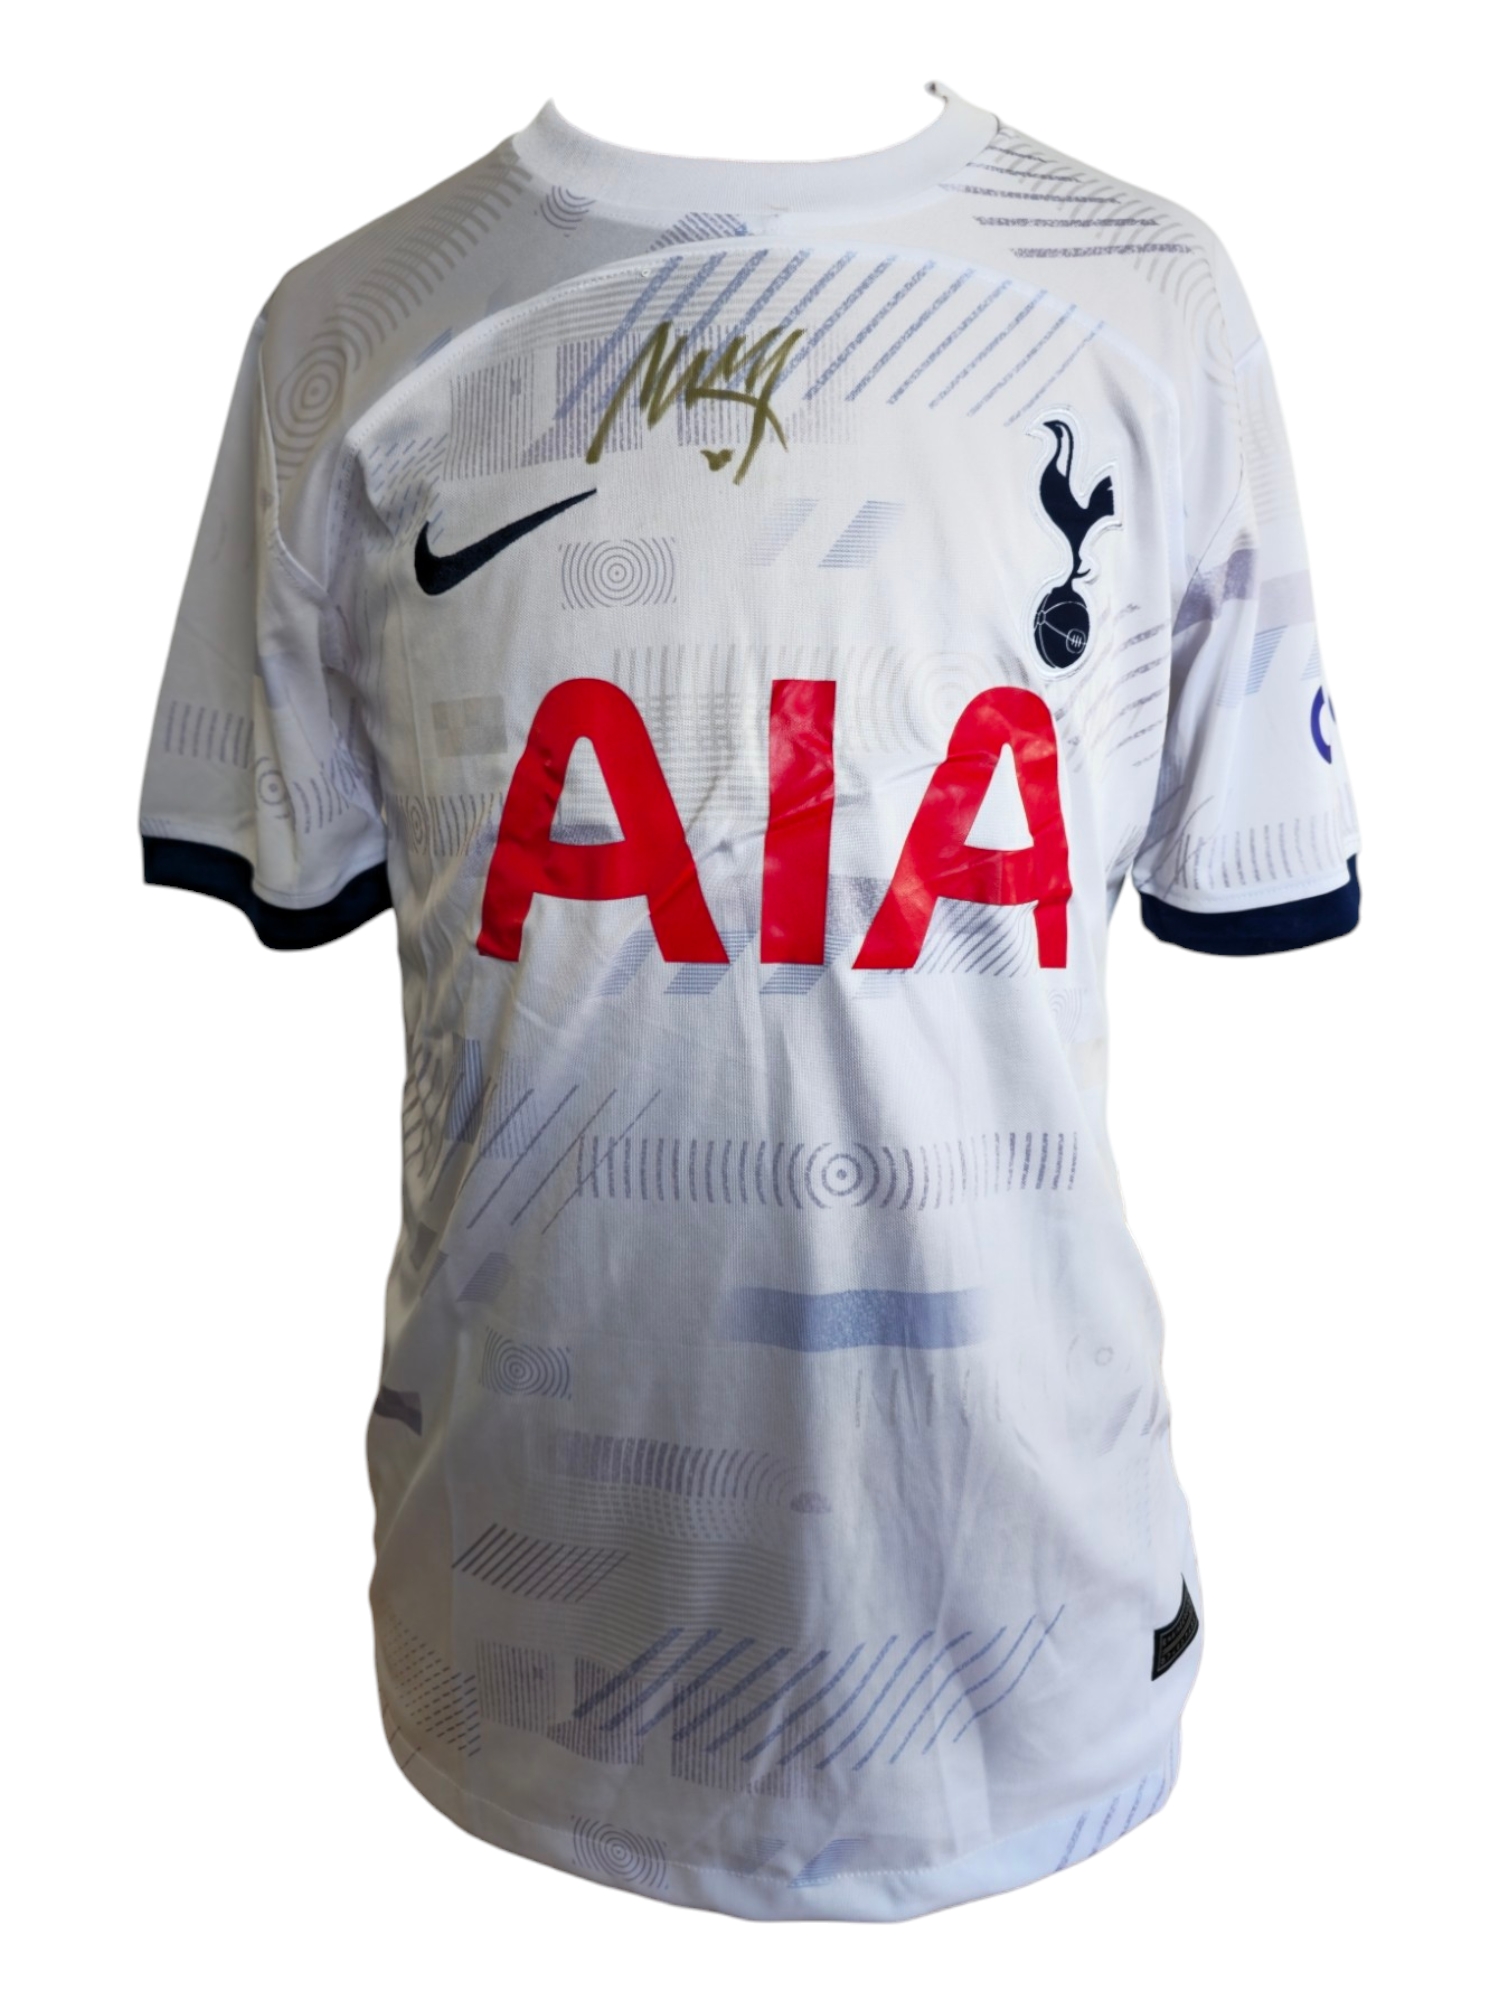 Micky van de Ven signed Tottenham men's home shirt Nike size small with tags. Good Condition. All